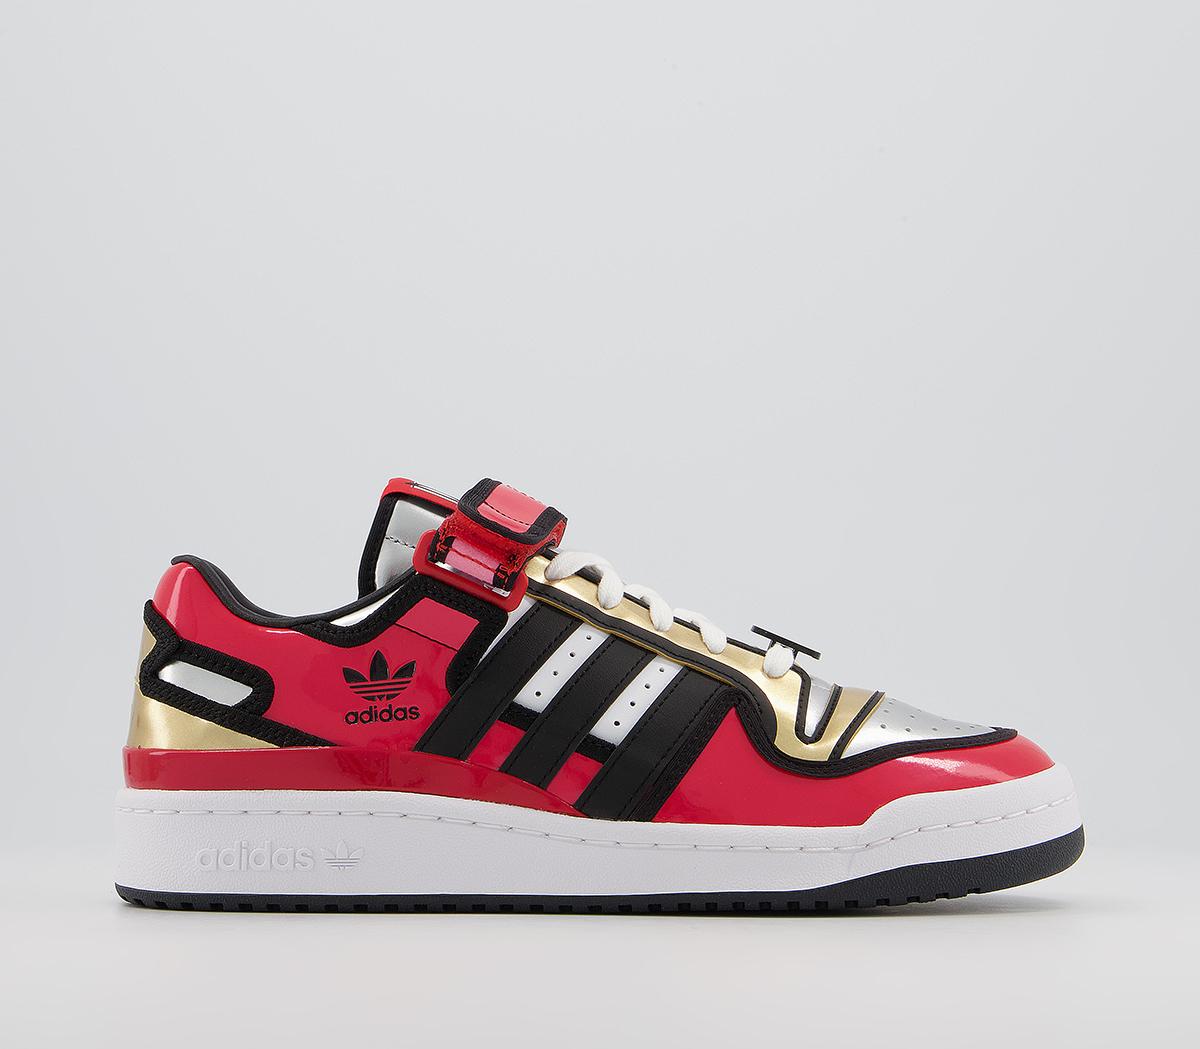 adidasForum 84 Low TrainersSimpsons Duff Red Core Black